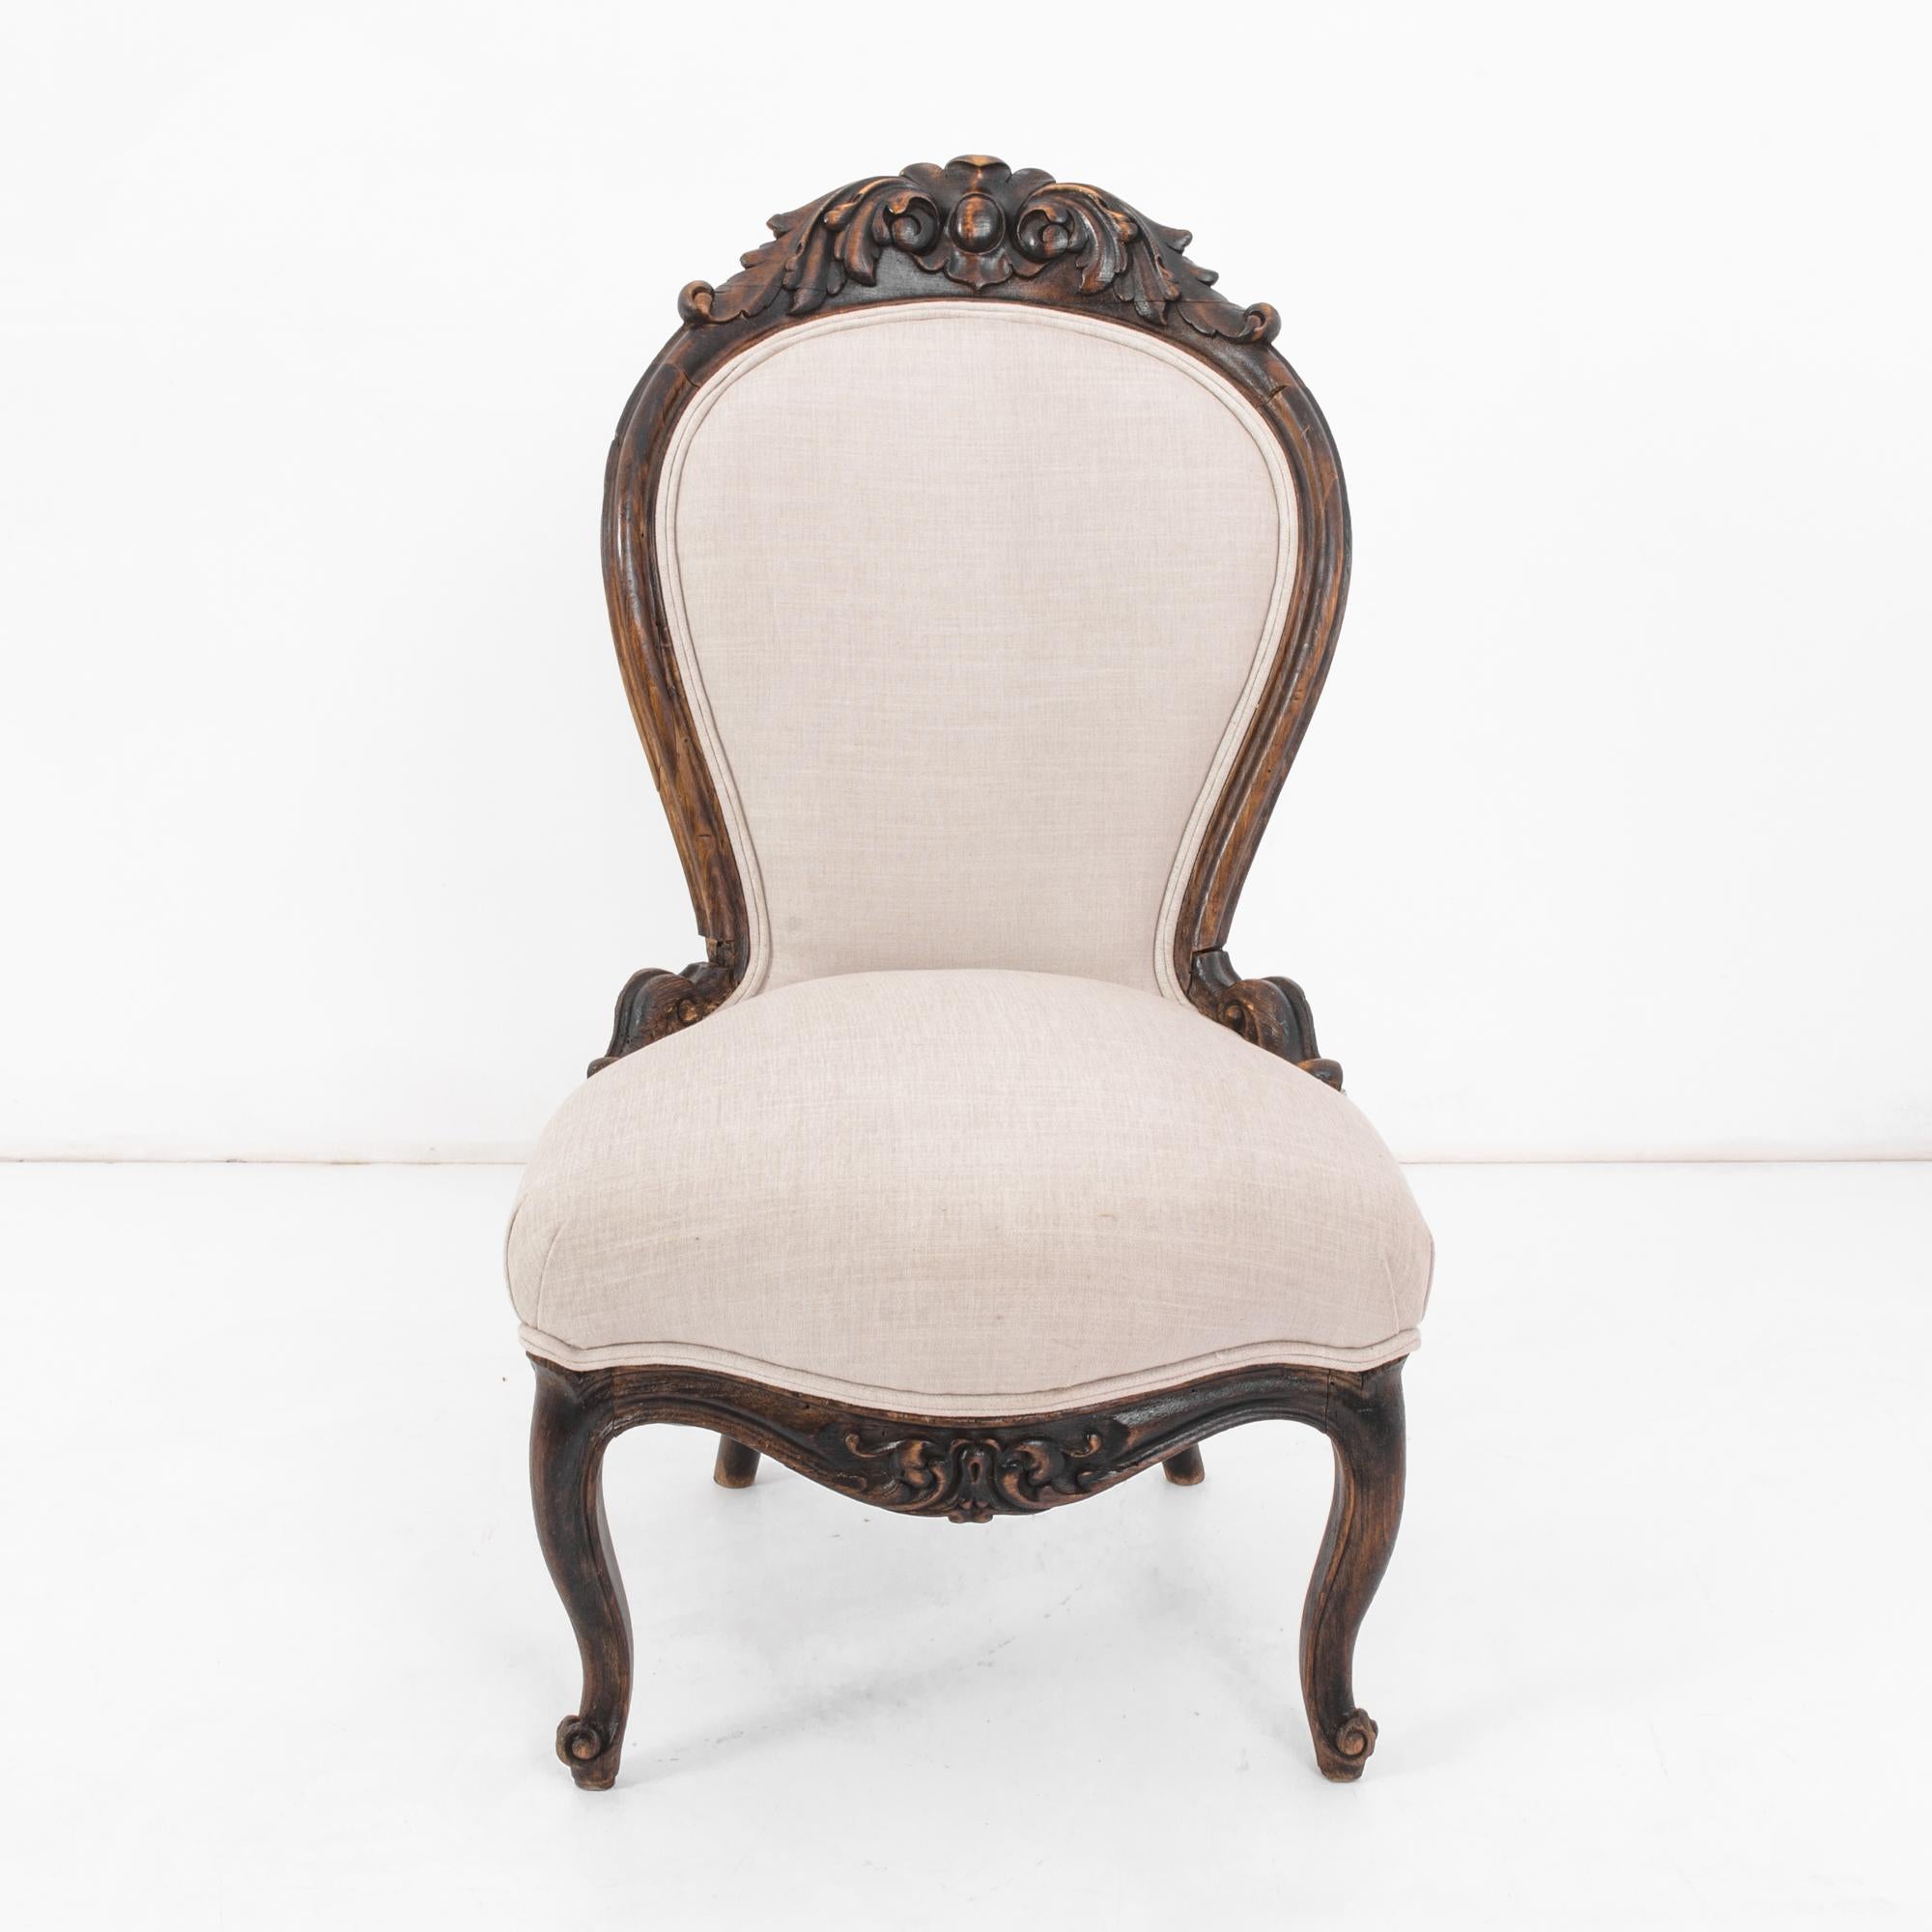 1880s French Wooden Chair with Upholstered Seat and Back For Sale 4